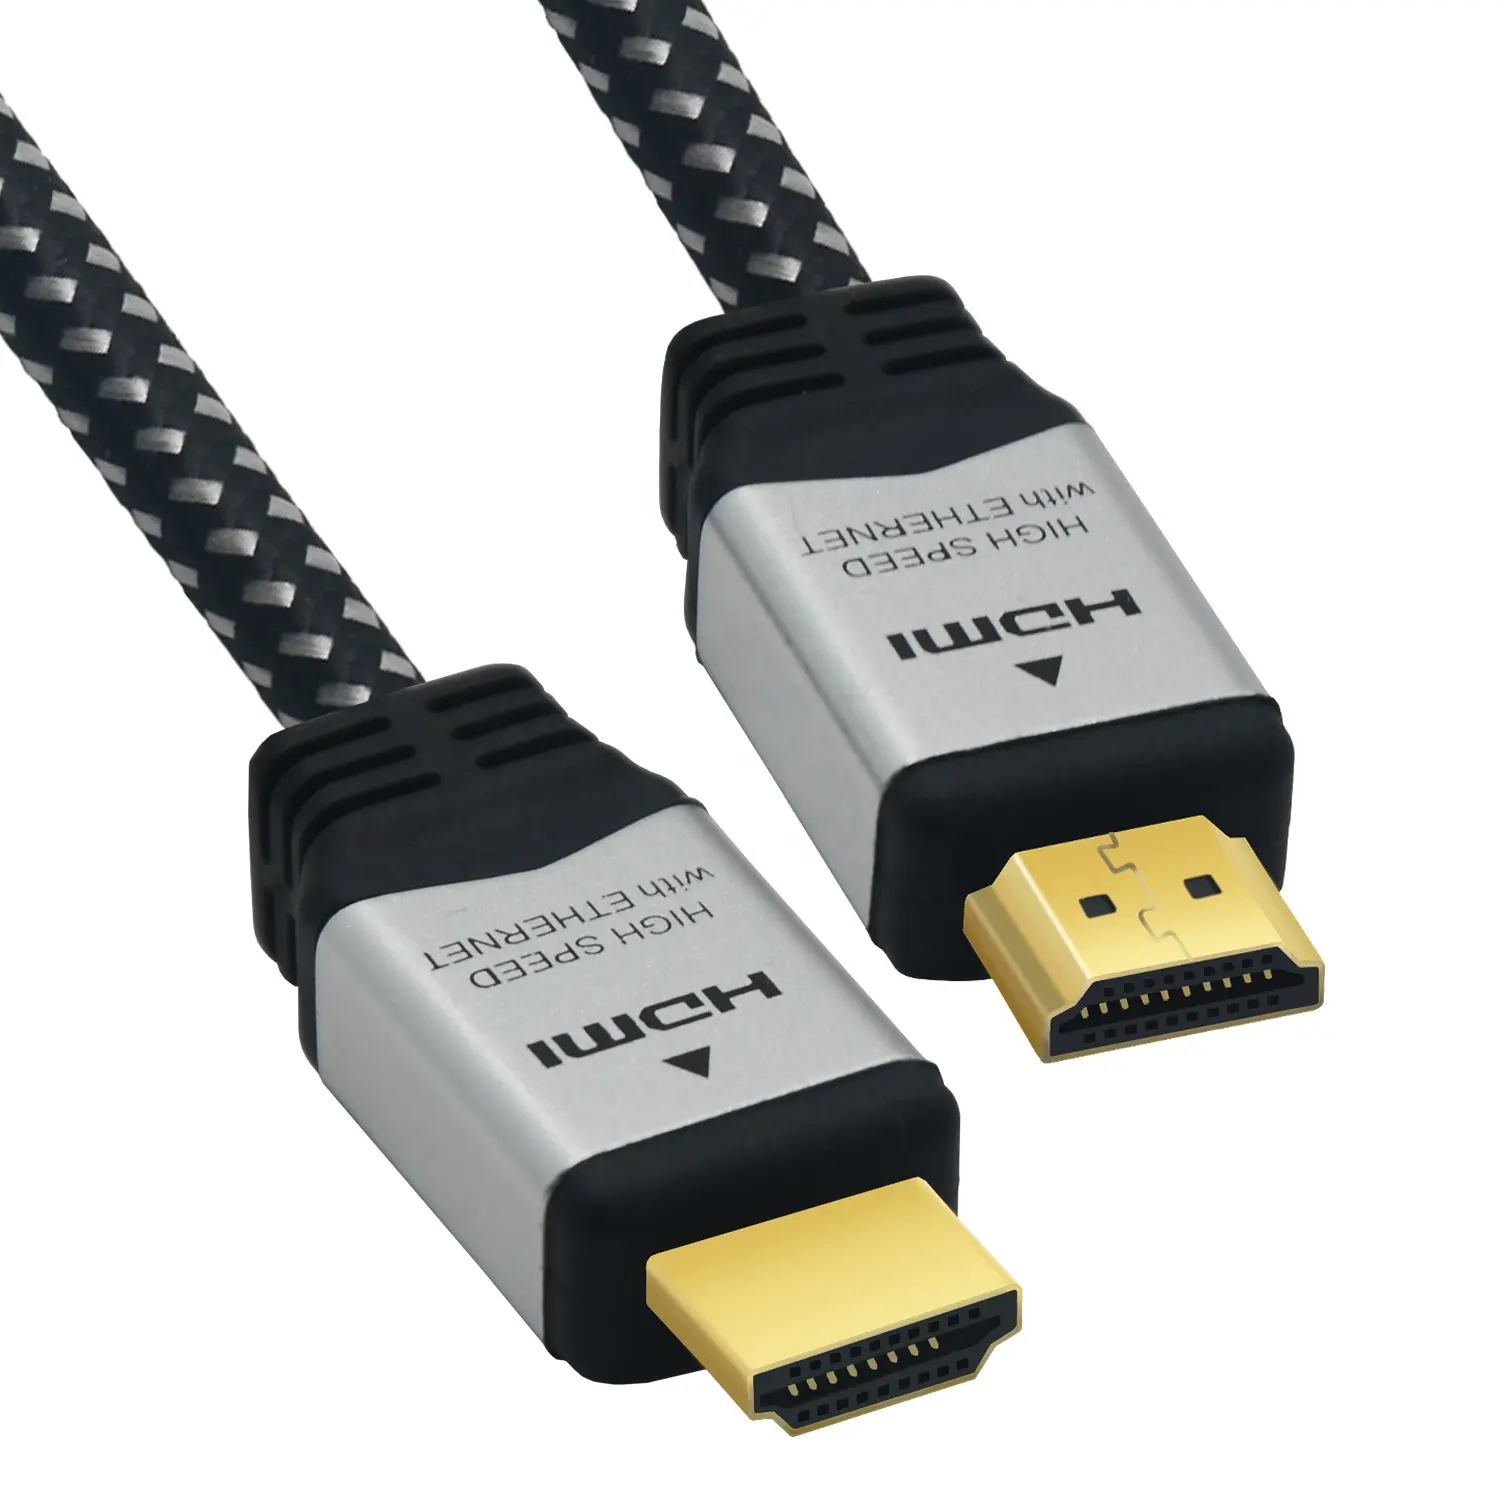 Ultra High Speed HDMI Cable with Ethernet Braided HDMI 4K Cable 3M 5M 10M 20M 30M 18Gbps for TV, PC, Laptops, PS3